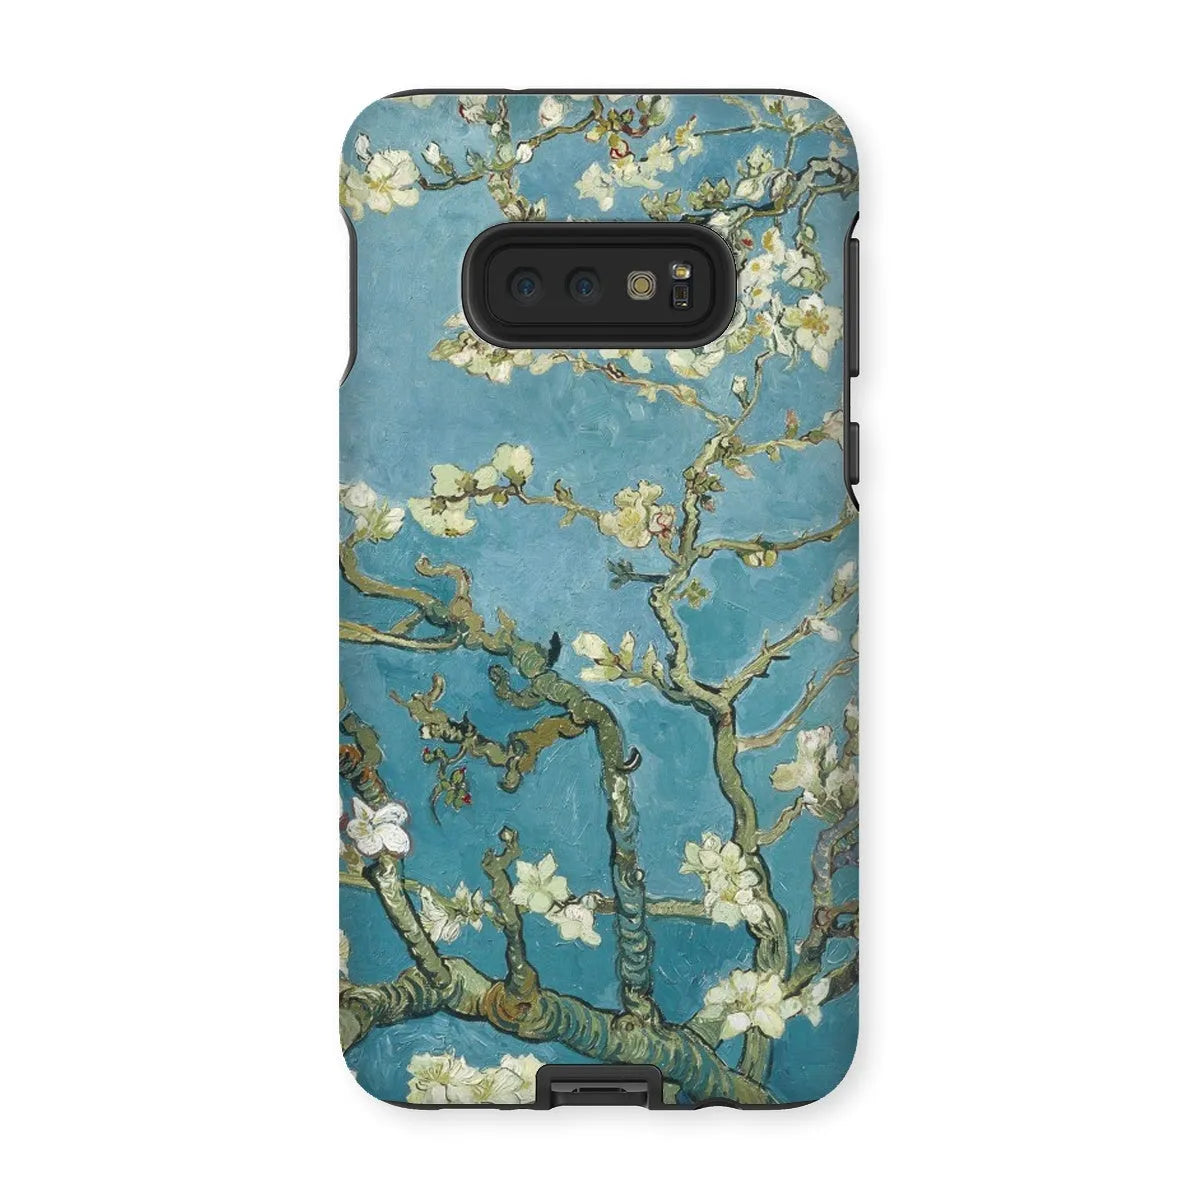 Almond Blossom - Vincent Van Gogh Aesthetic Phone Case - Samsung Galaxy S10e / Matte - Mobile Phone Cases - Aesthetic